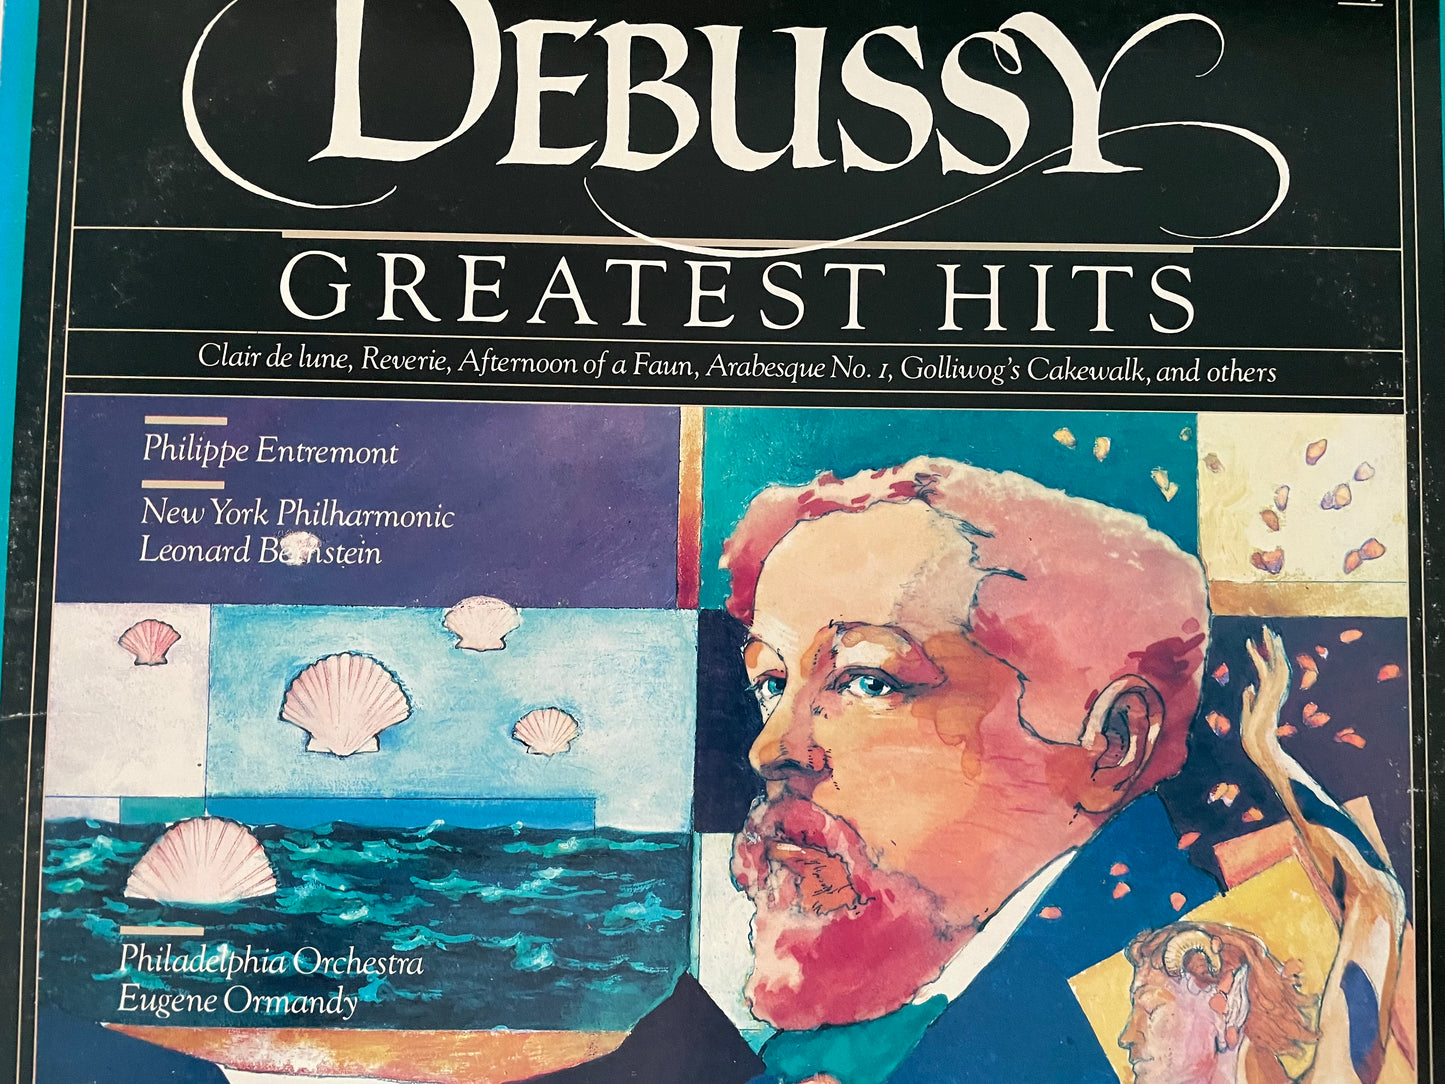 "DEBUSSY -GREATEST HITS"-$6.99 +SHIPPING $5.00